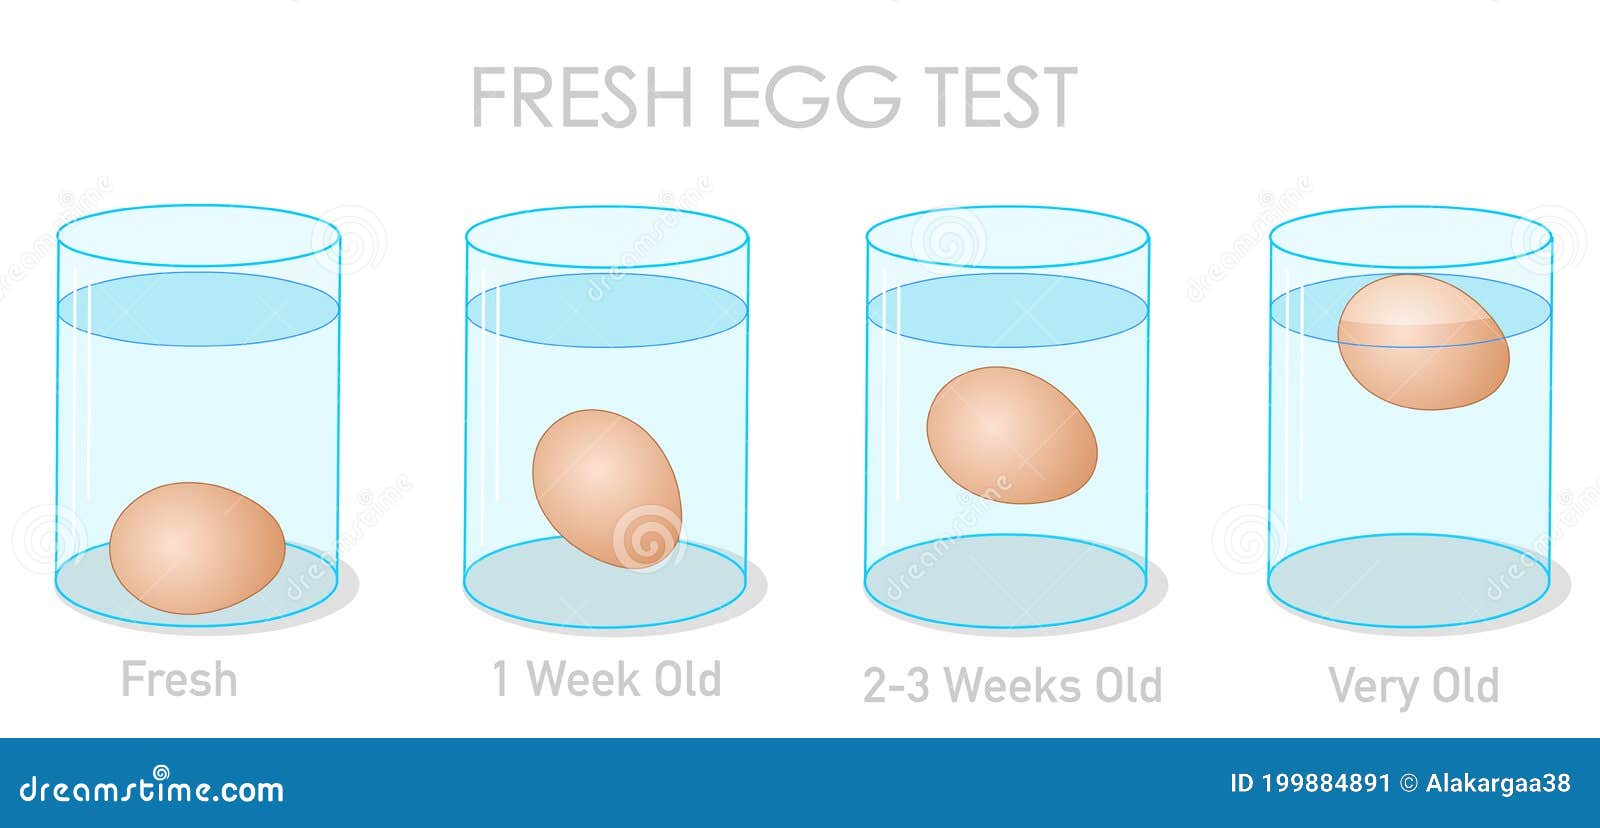 fresh egg test. finding daily fresh eggs, weekly old and stale eggs with the flotation and sinking experiment. freshness